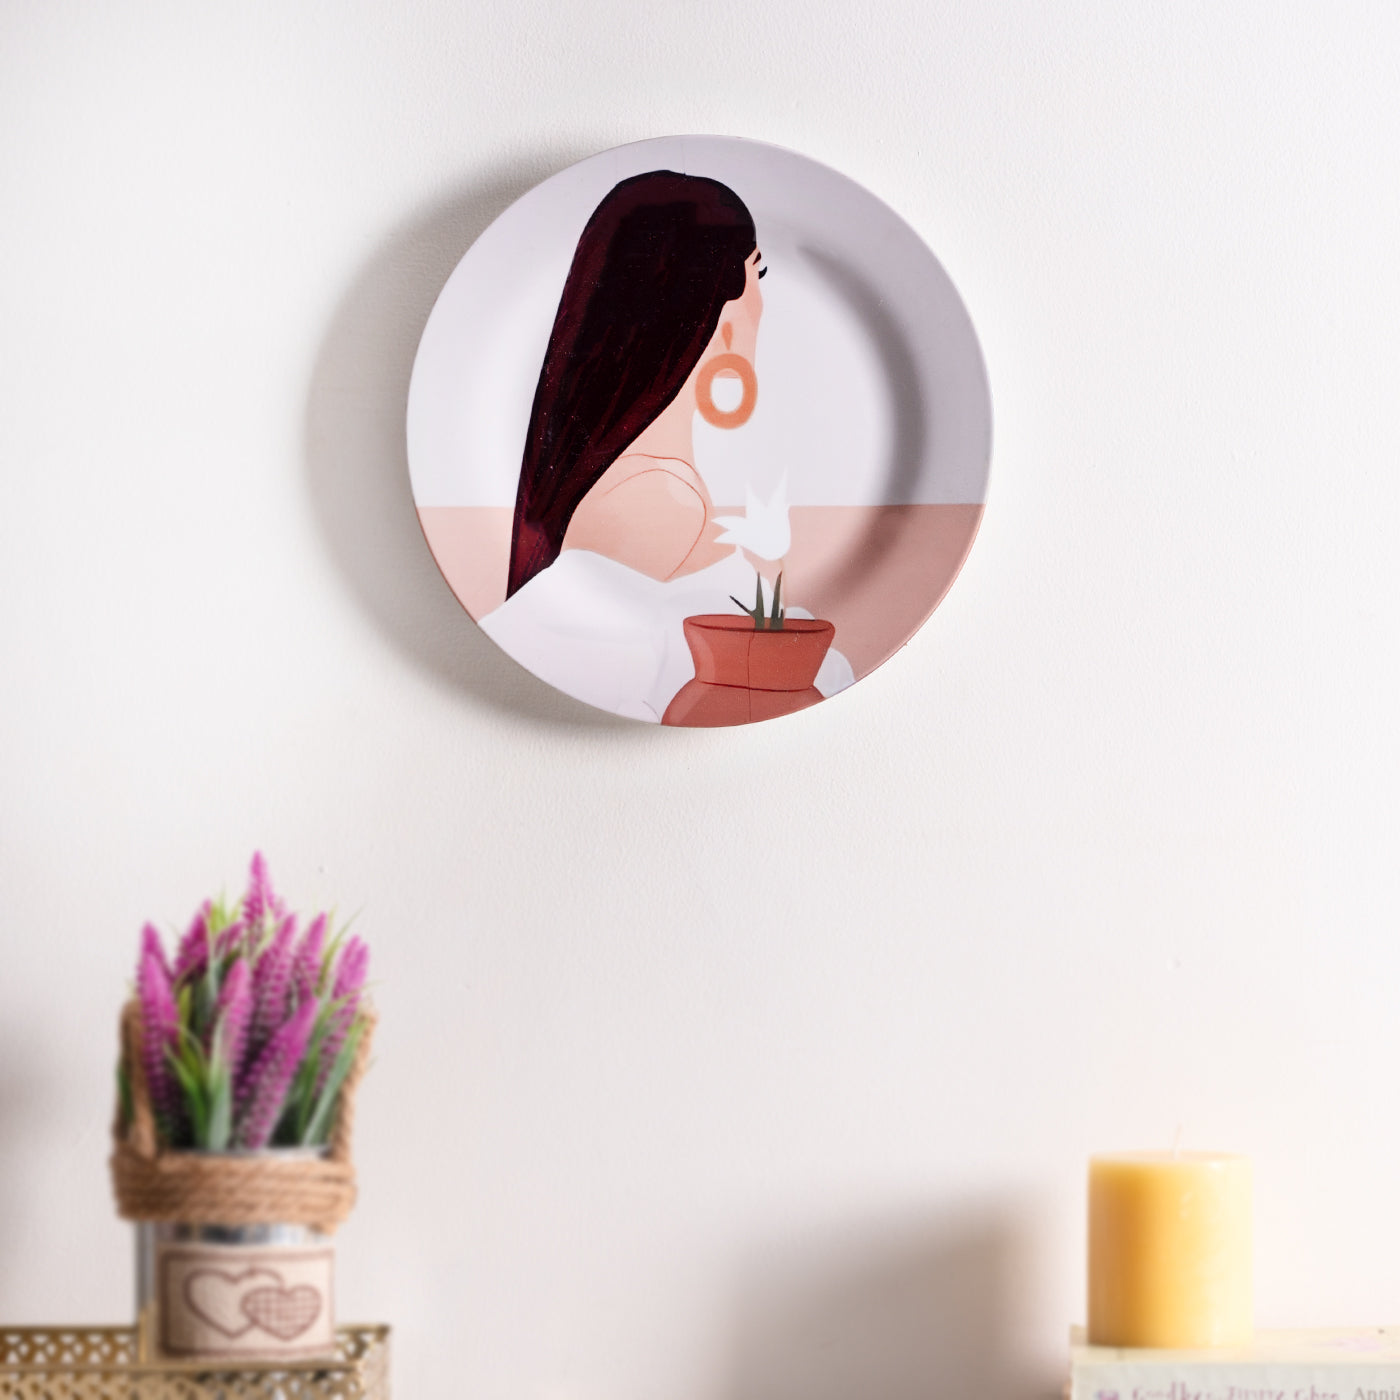 Graphic Glam Ceramic wall plates decor hanging / tabletop